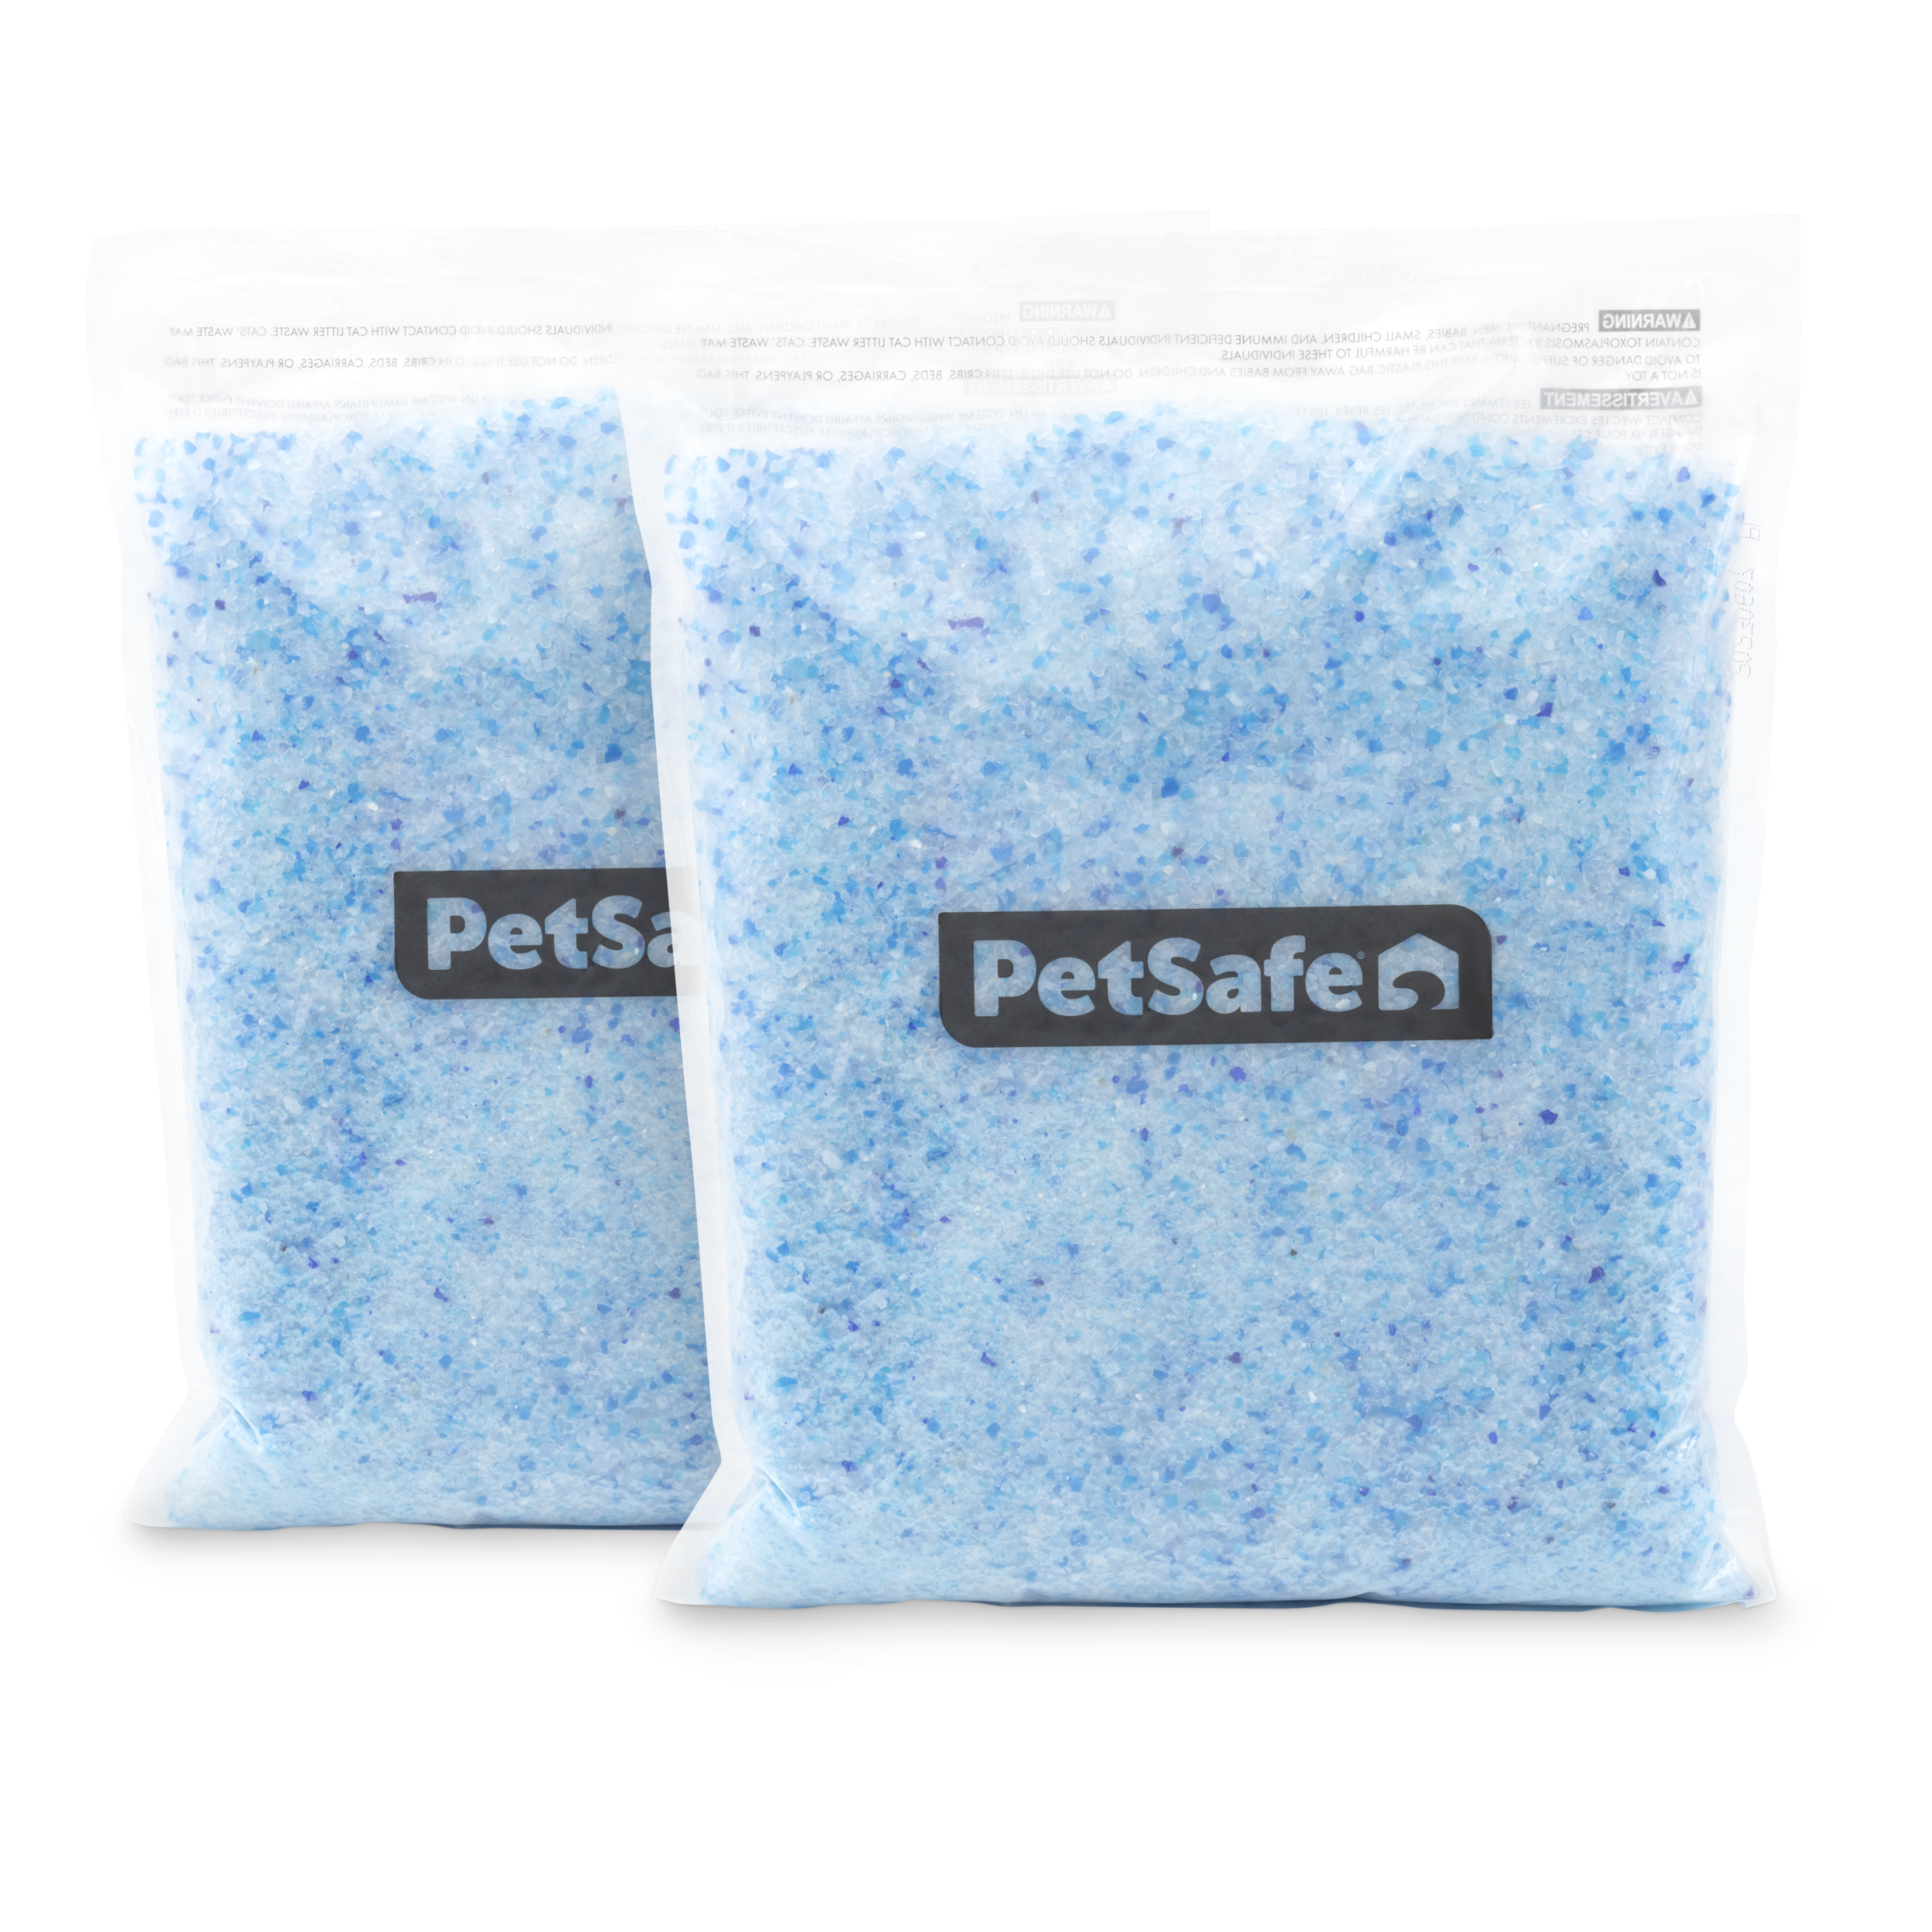 ScoopFree™ Replacement Blue Crystal Litter Tray